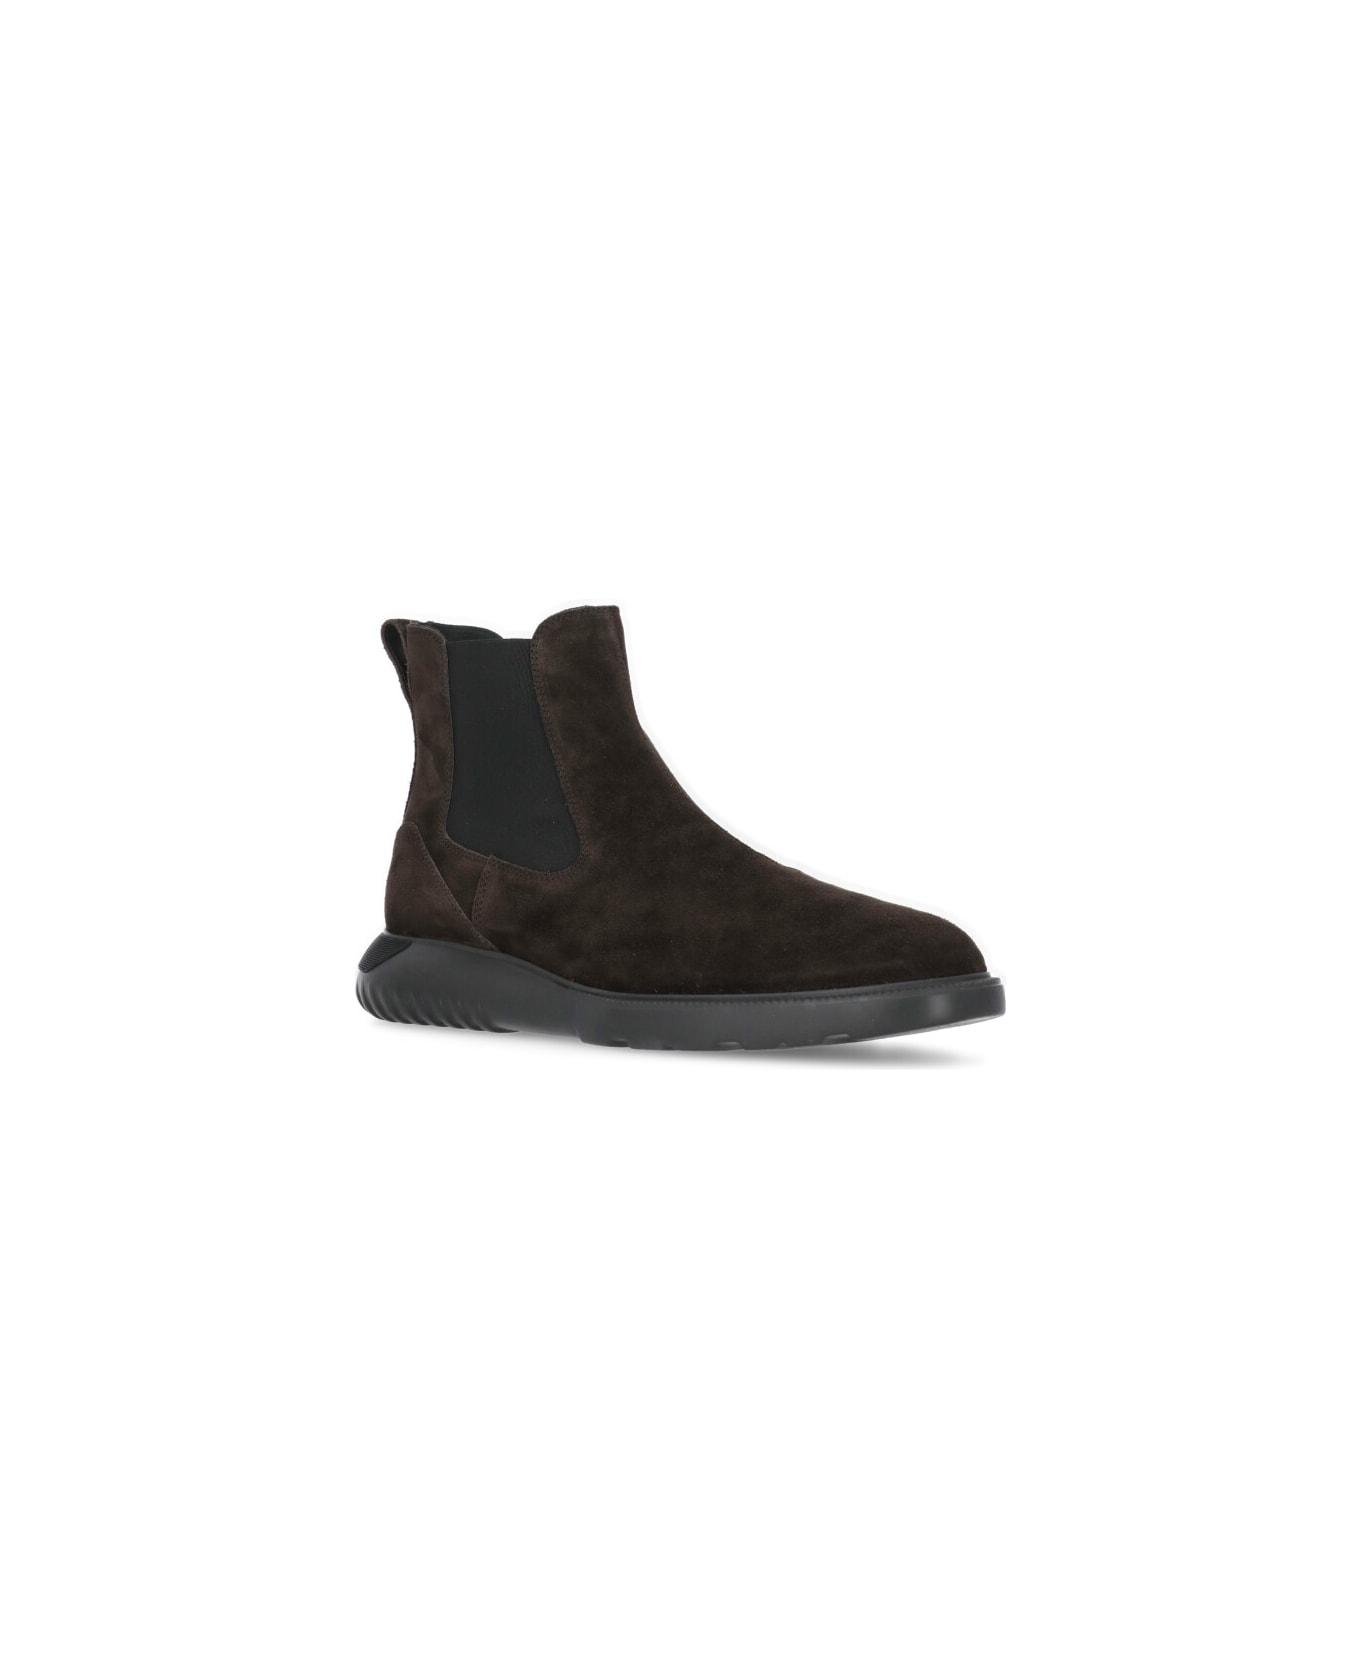 Hogan Round Toe Ankle Boots - Brown